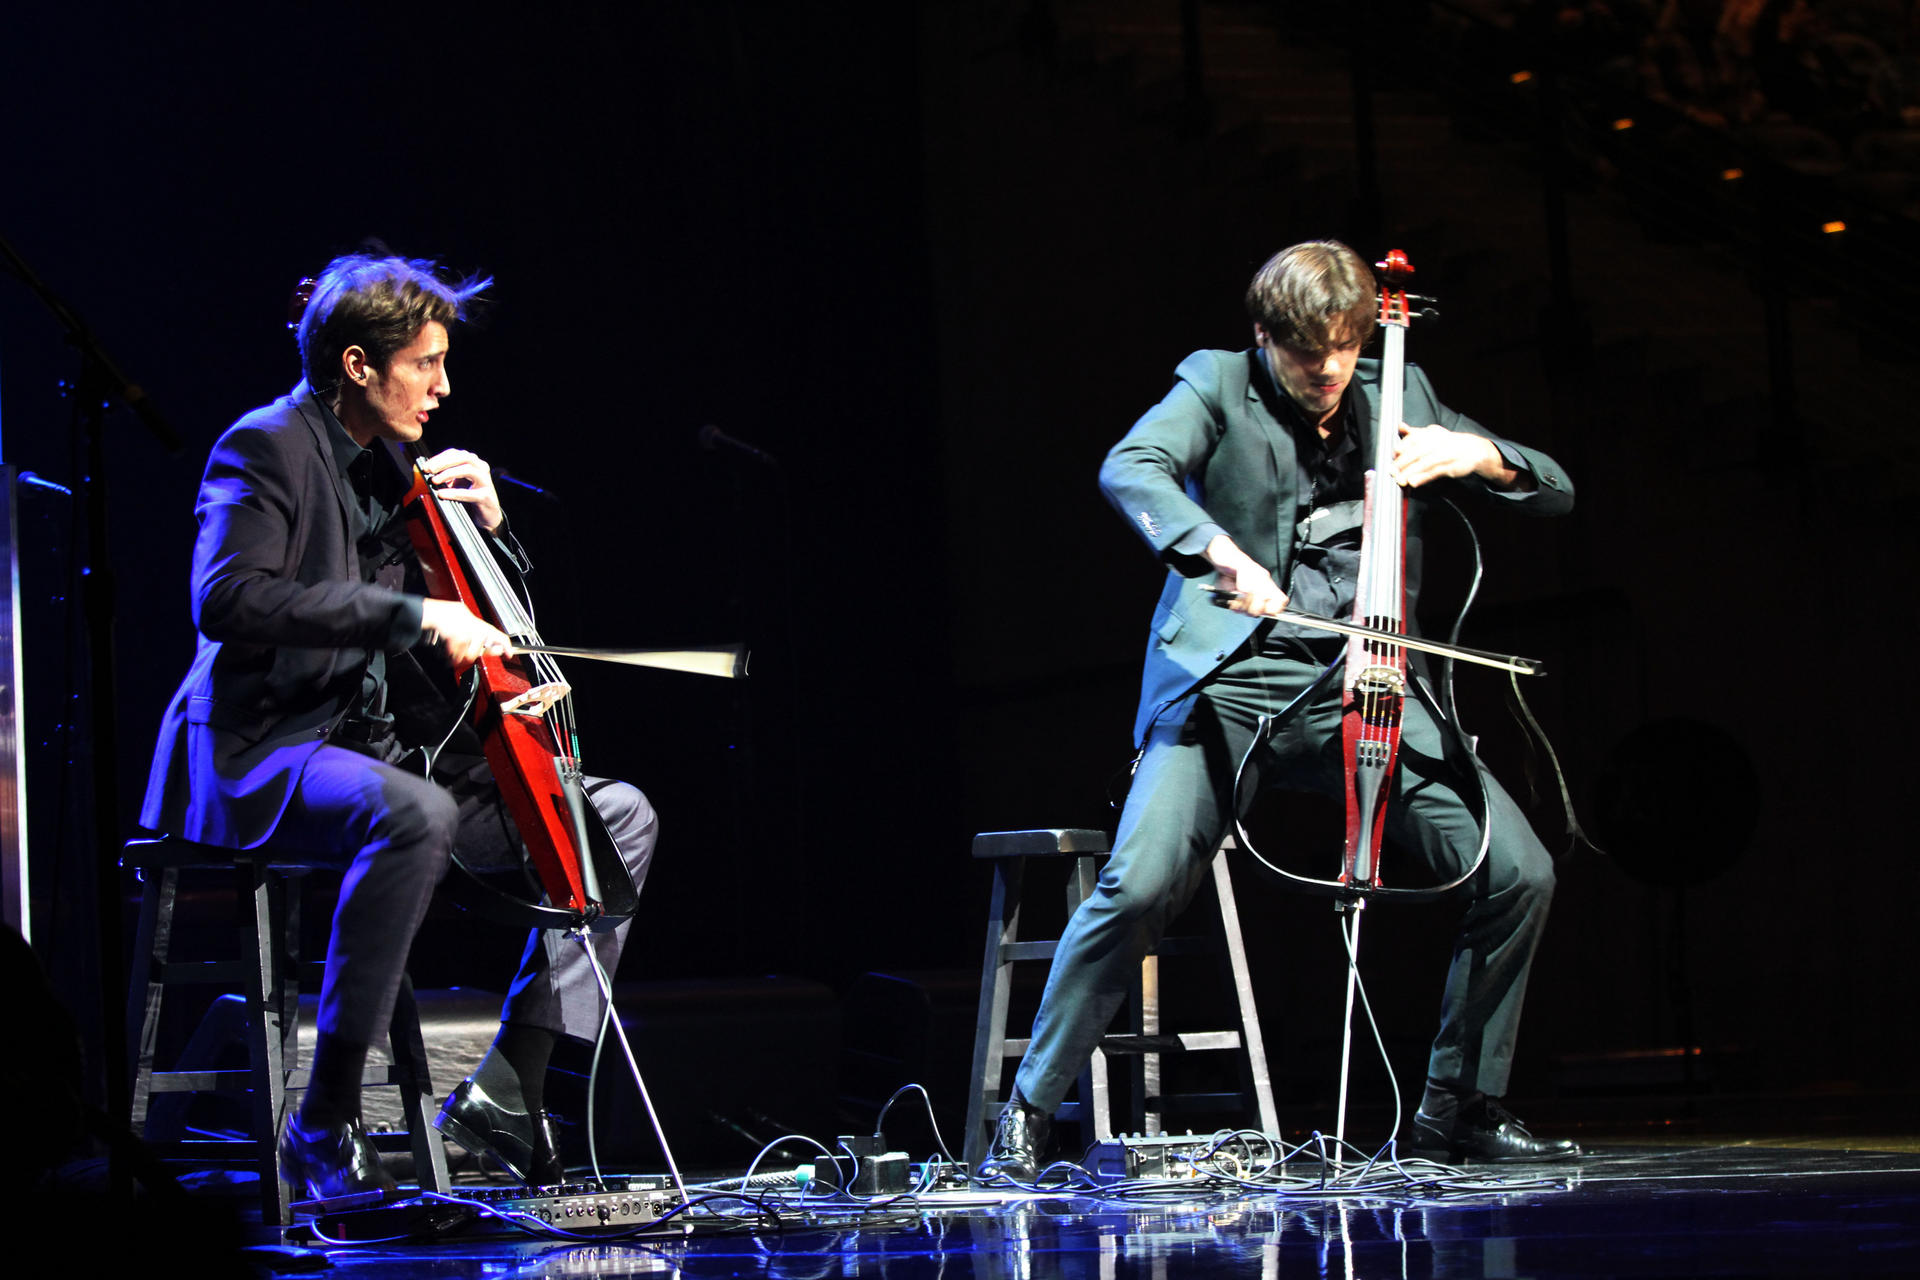 Double trouble: Luka Sulic (left) and Stjepan Hauser on stage.